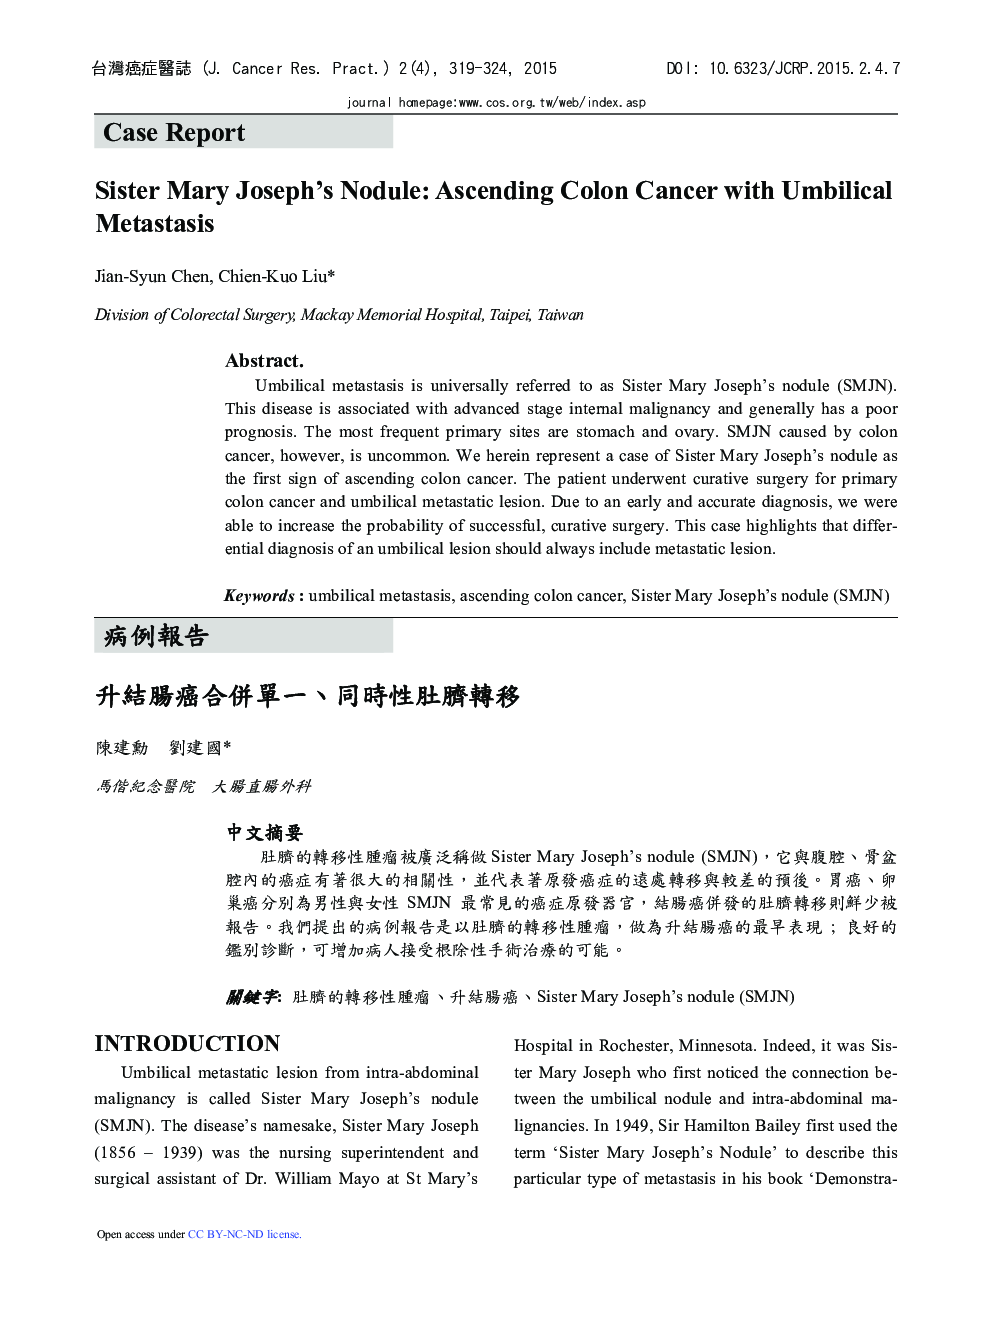 Sister Mary Joseph's Nodule: Ascending Colon Cancer with Umbilical Metastasis